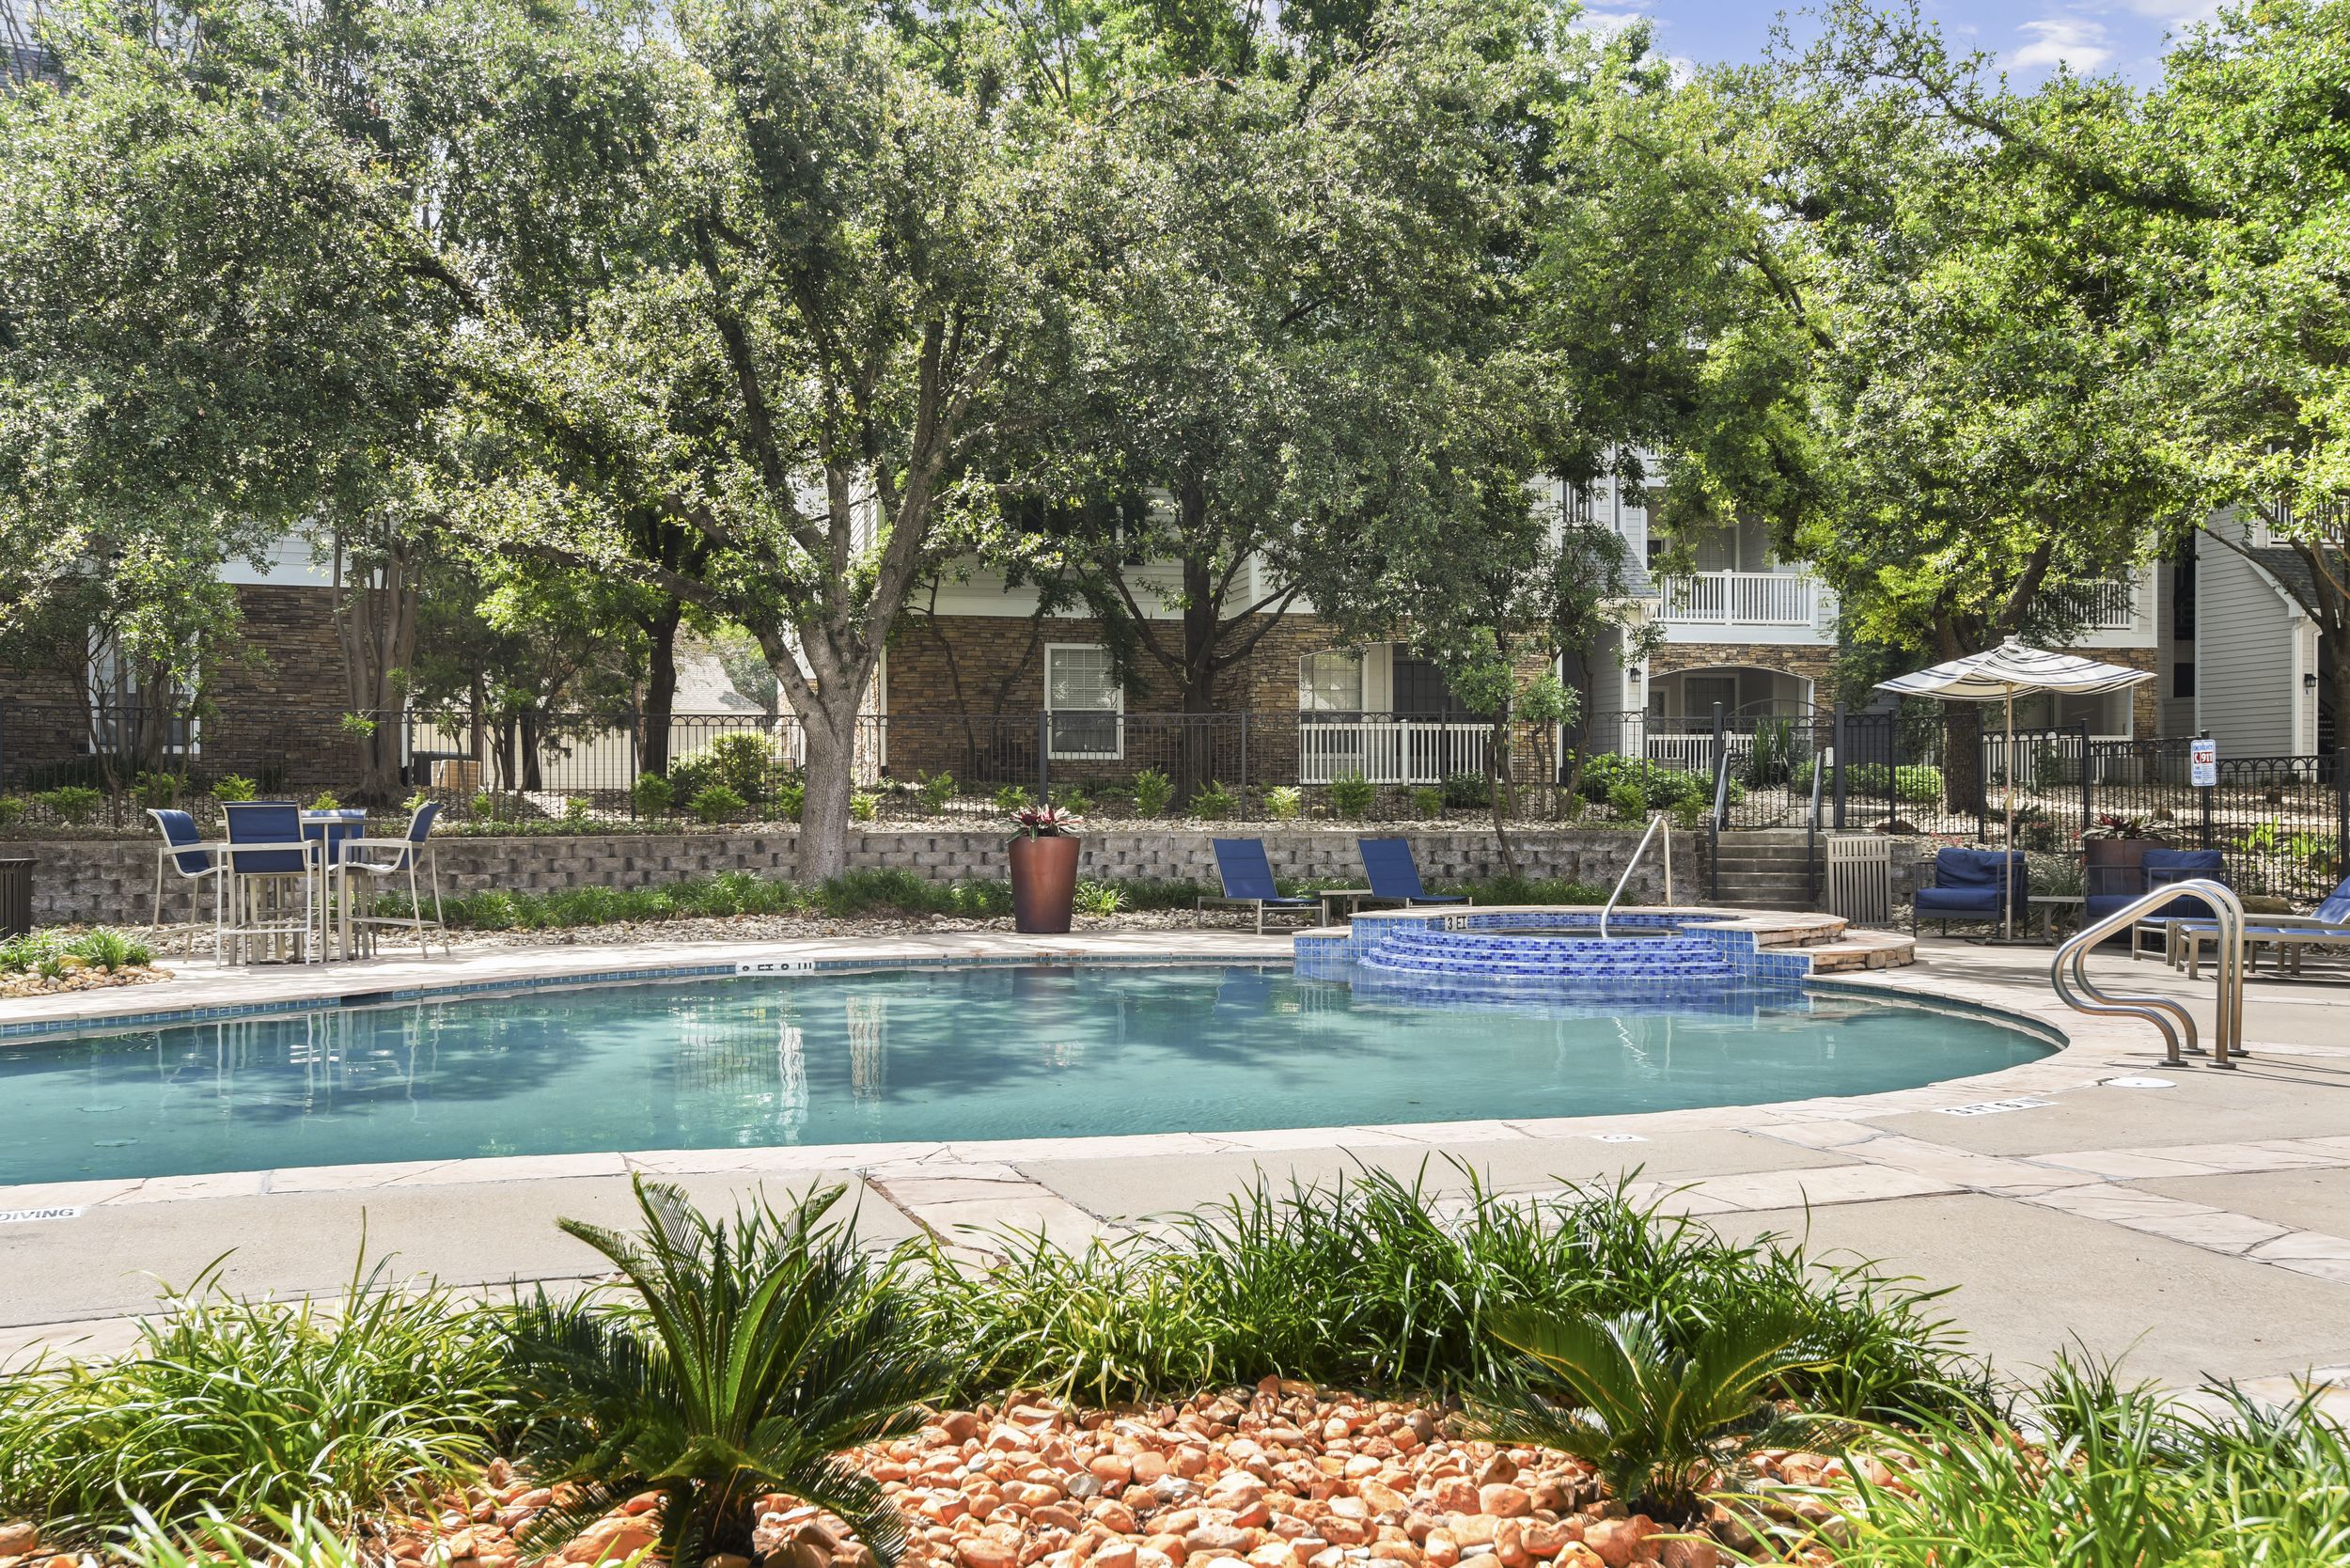 Classic pool area with outdoor seating and pool umbrellas at Lantower Round Rock.